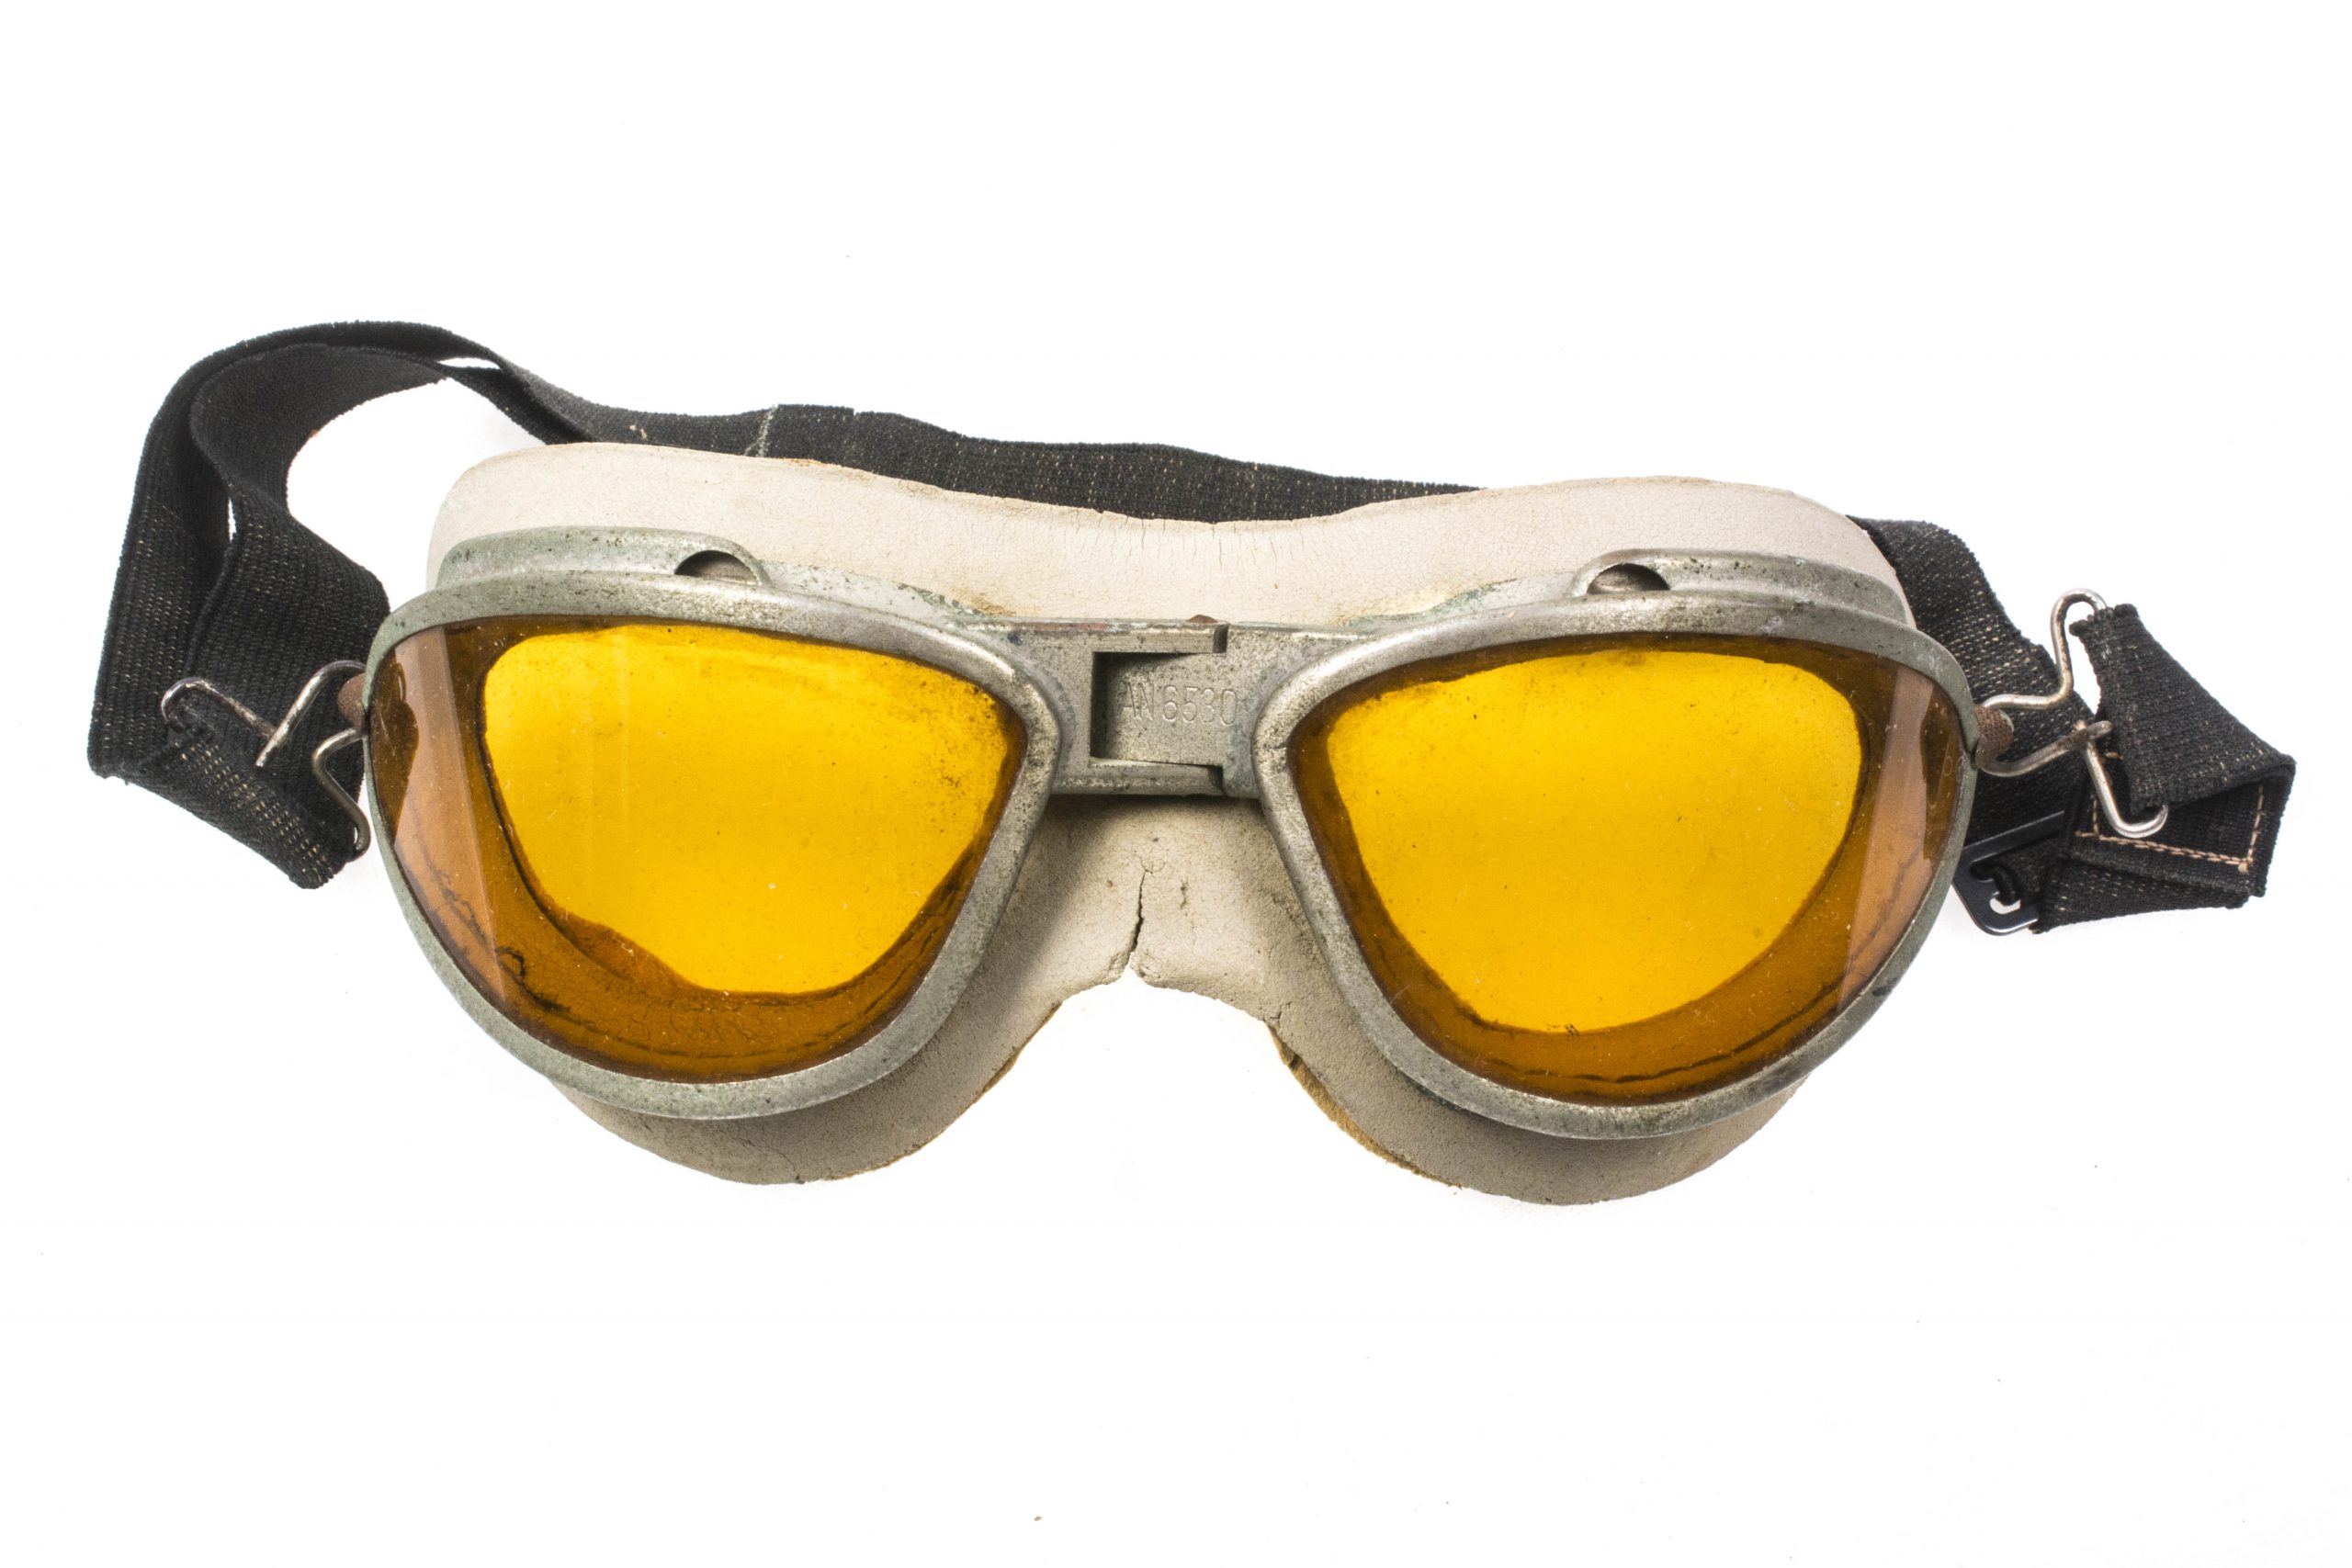 USAAF AN-6530 boxed goggles – fjm44